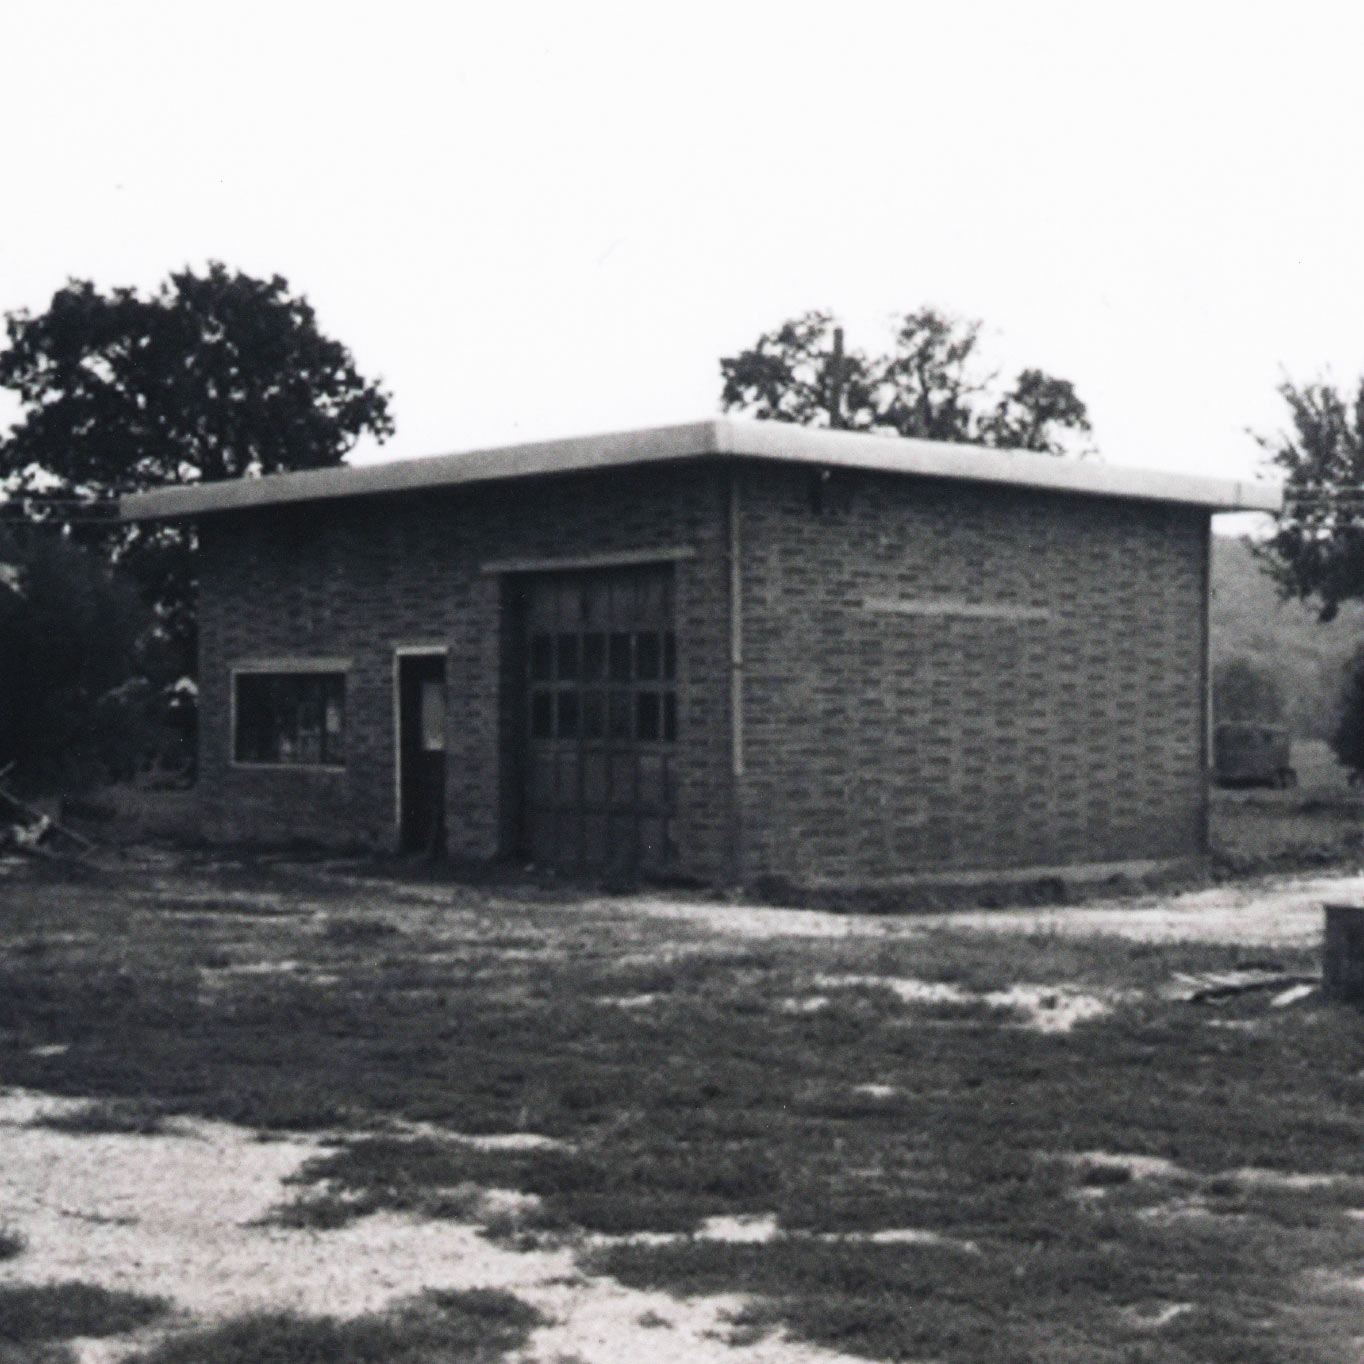 historical image of the Station 3 building